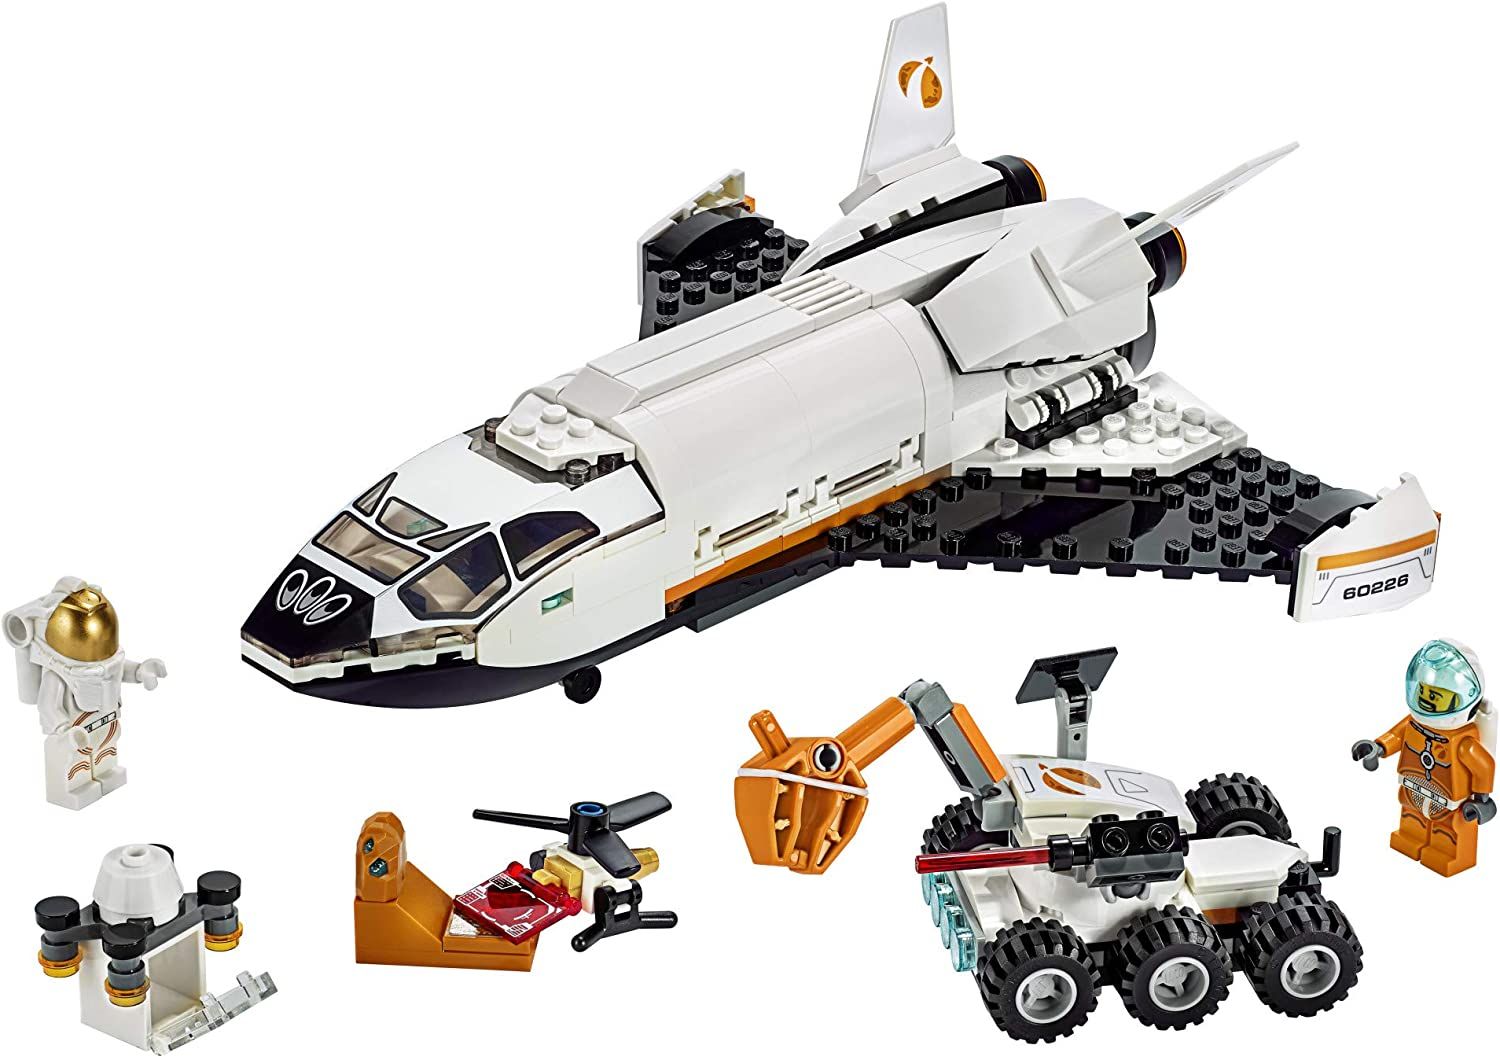 LEGO-City-Space-Mars-Research-Shuttle-2-1